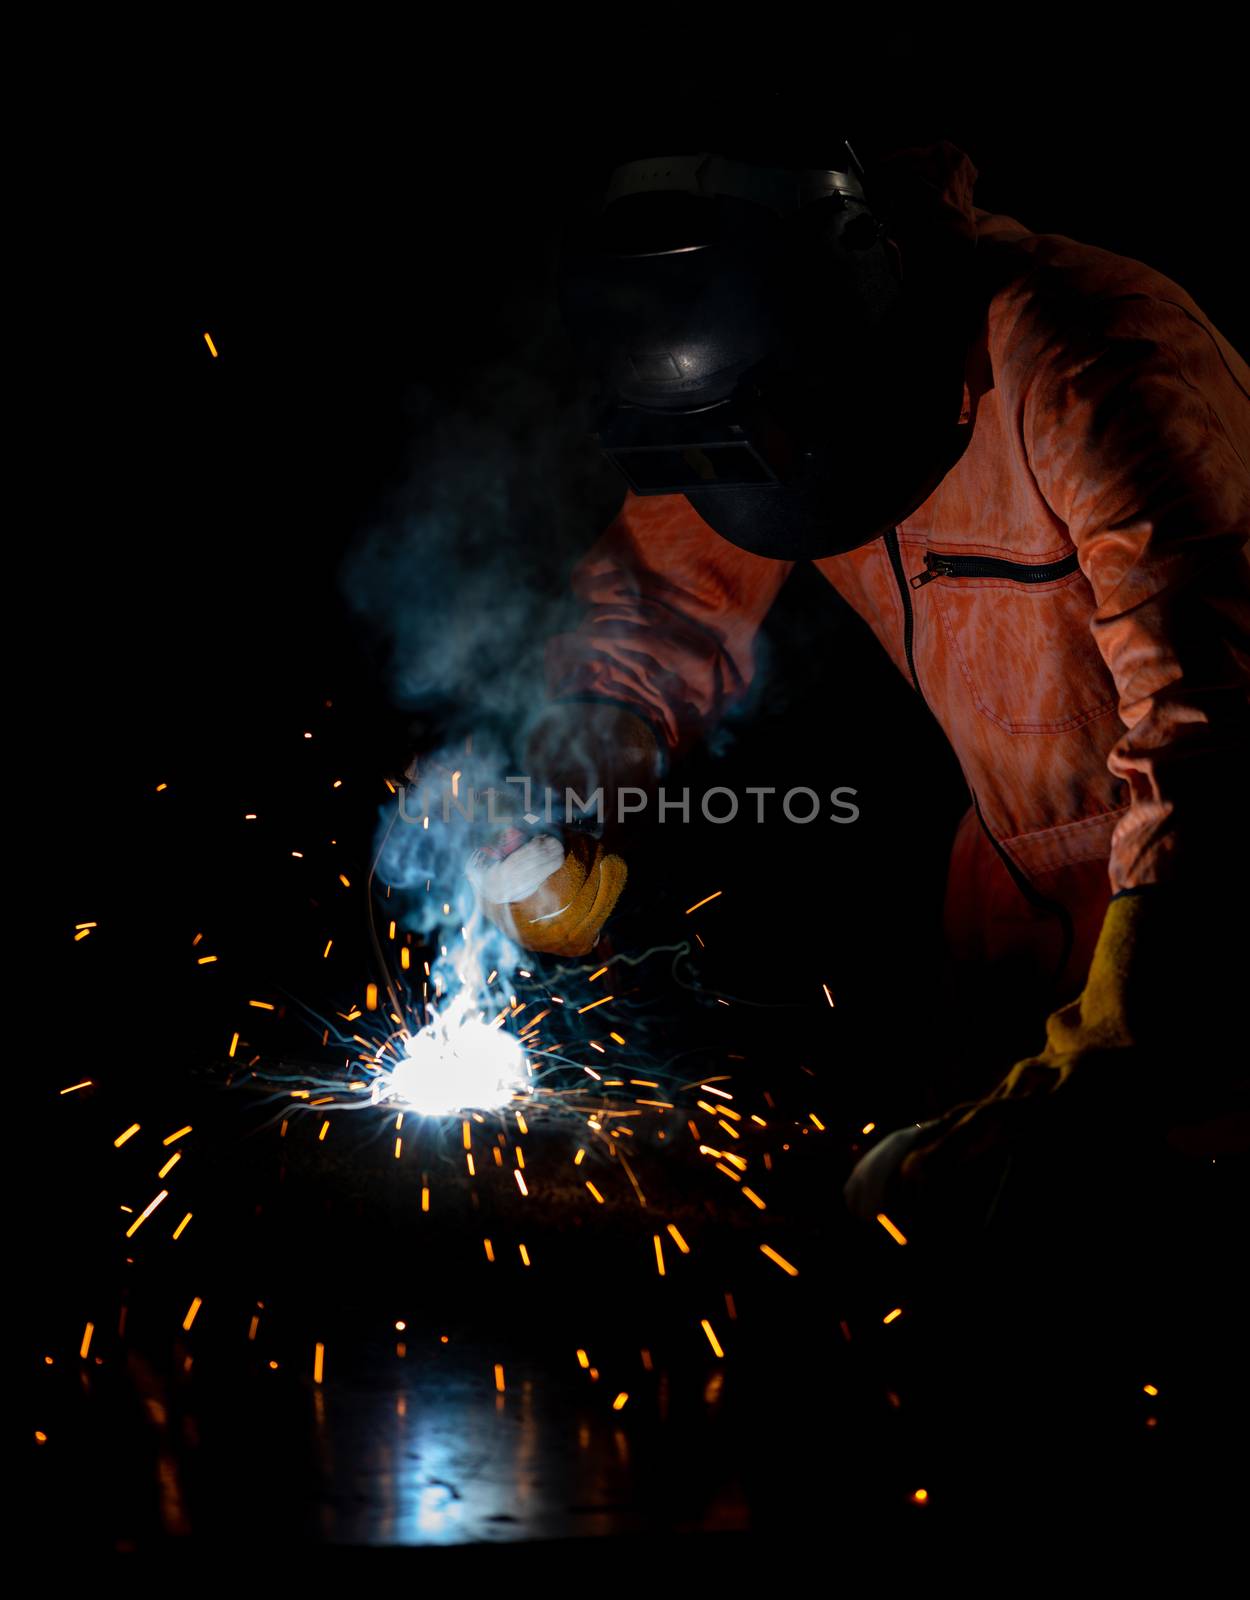 Metal industry workers are welding steel sheets for real estate projects received. Sparkler on black background, close-up. Heavy work in factory.